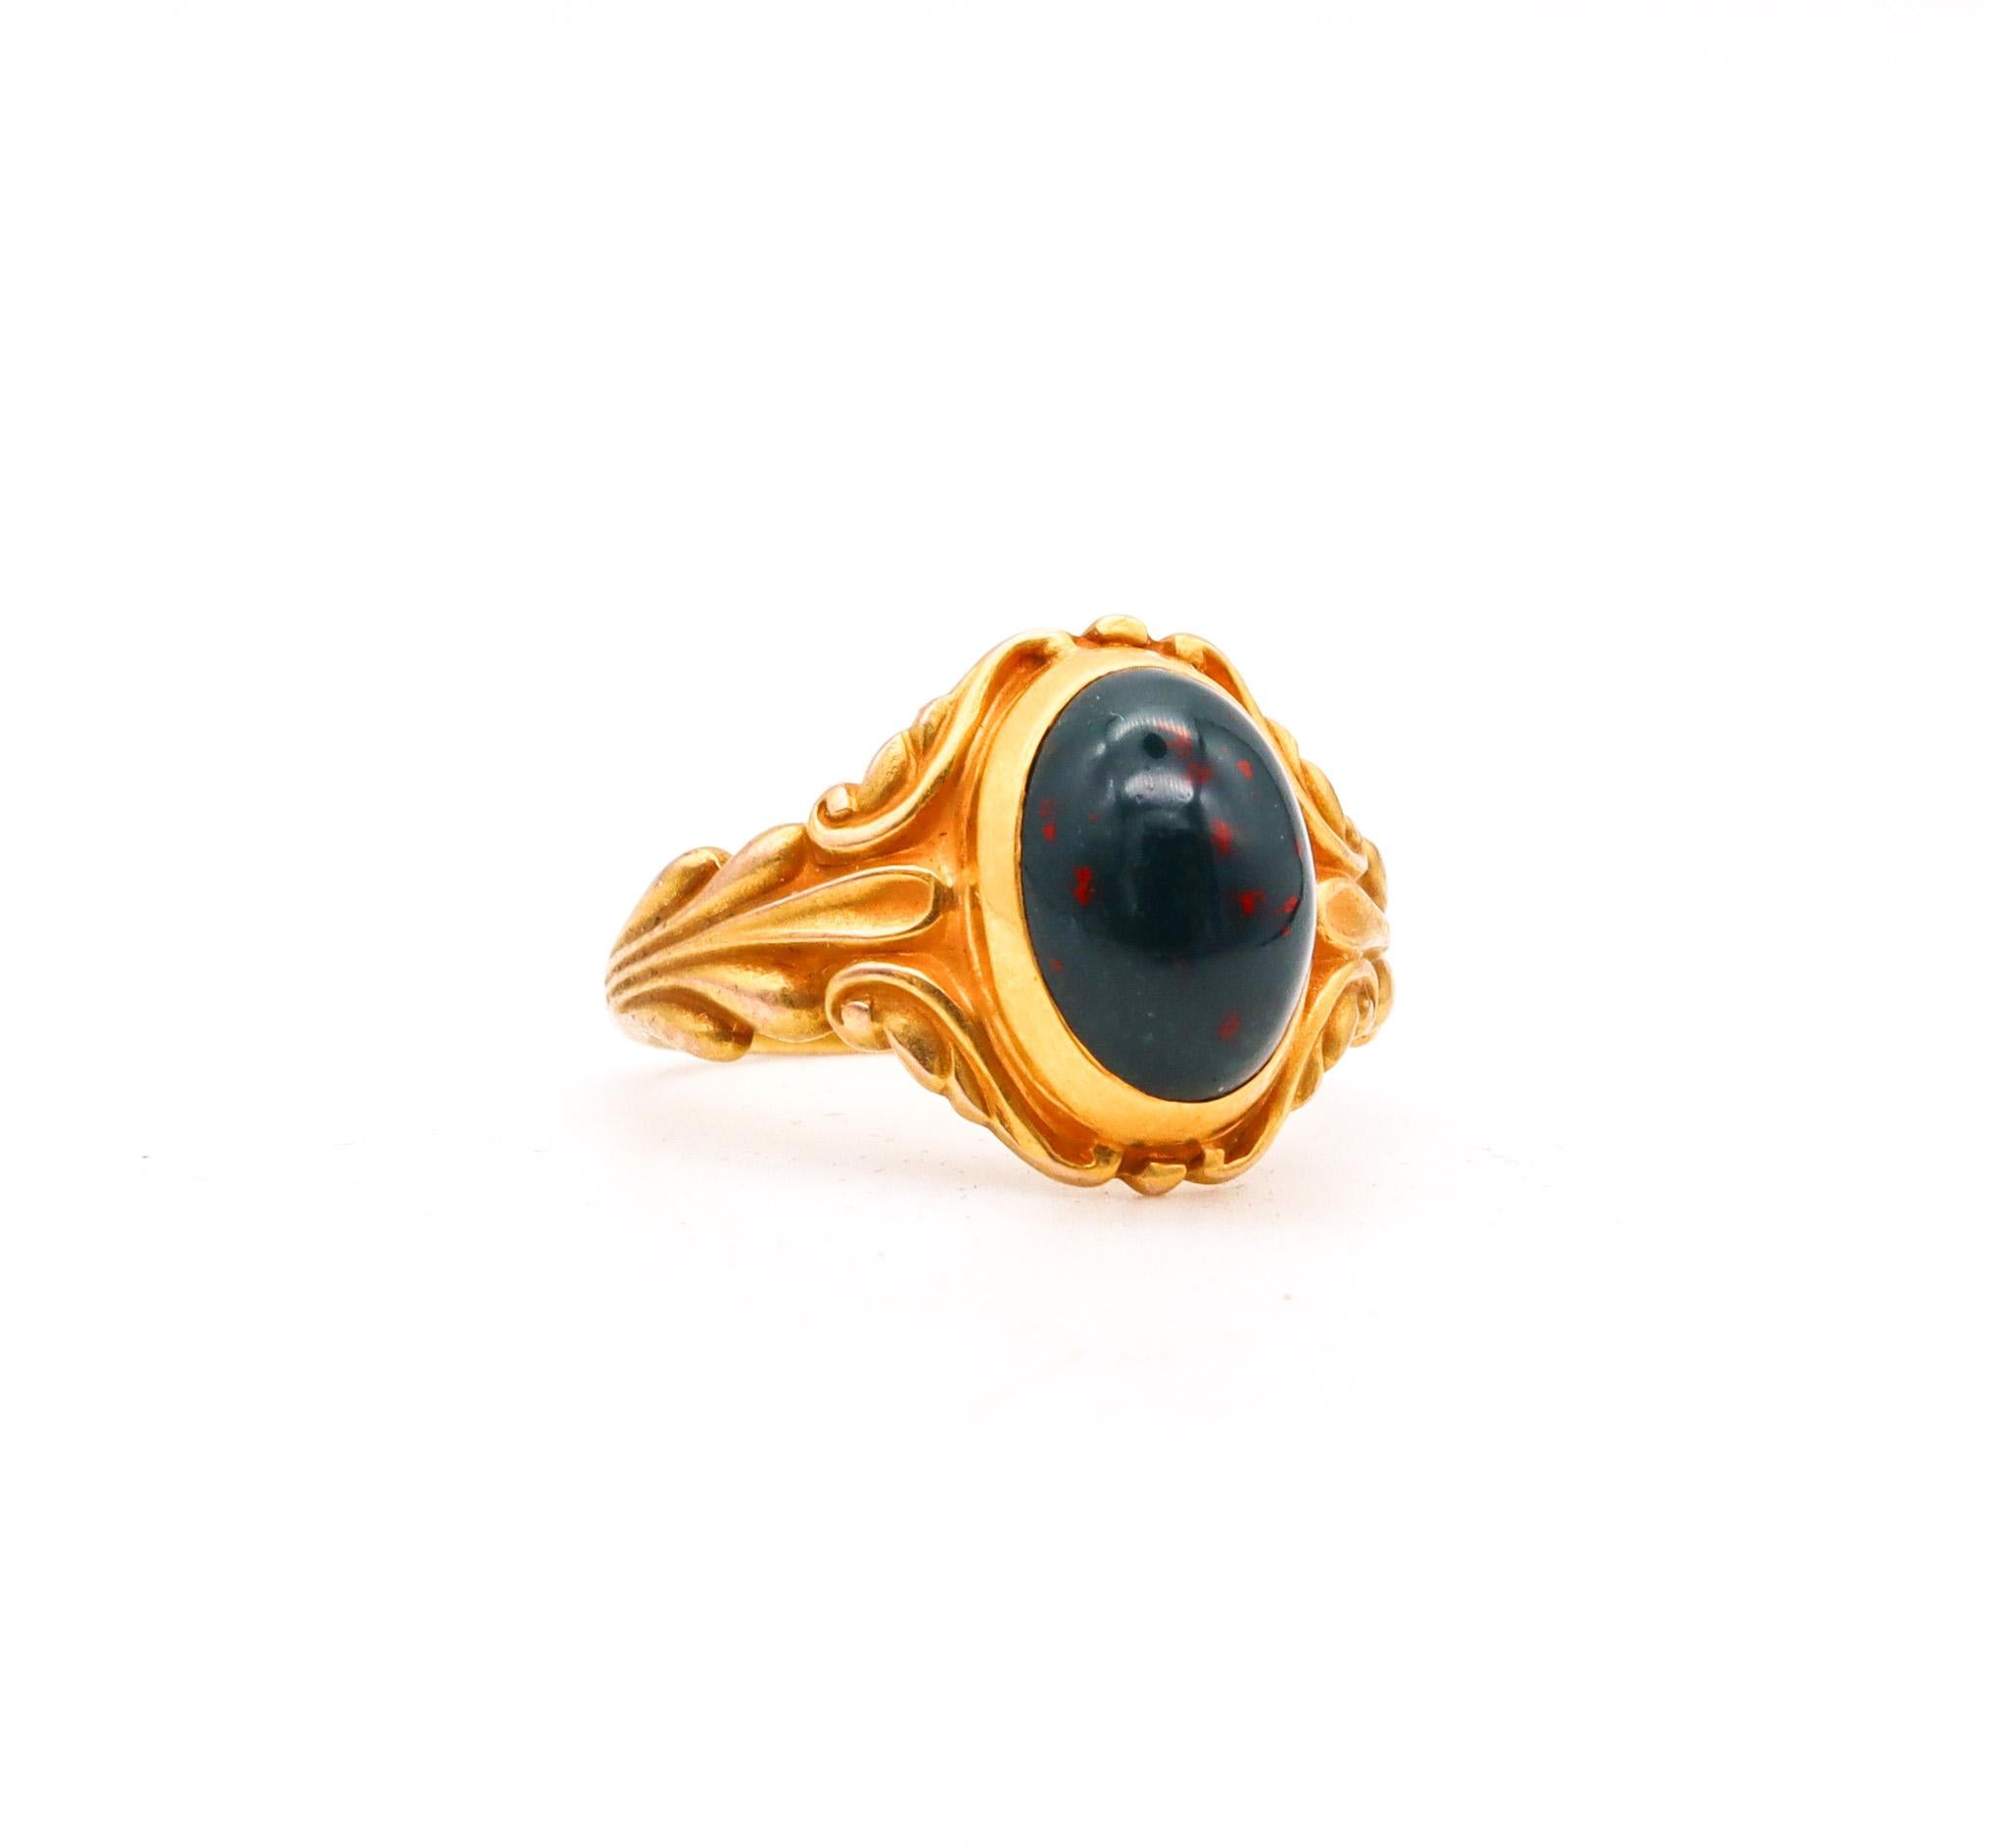 Austrian art nouveau ring with bloodstone.

A highly decorated ring, created in Austria or probably Germany during the early art nouveau period, back in the 1890. This beautiful ring has been crafted with intricate curved scrolls motifs in yellow